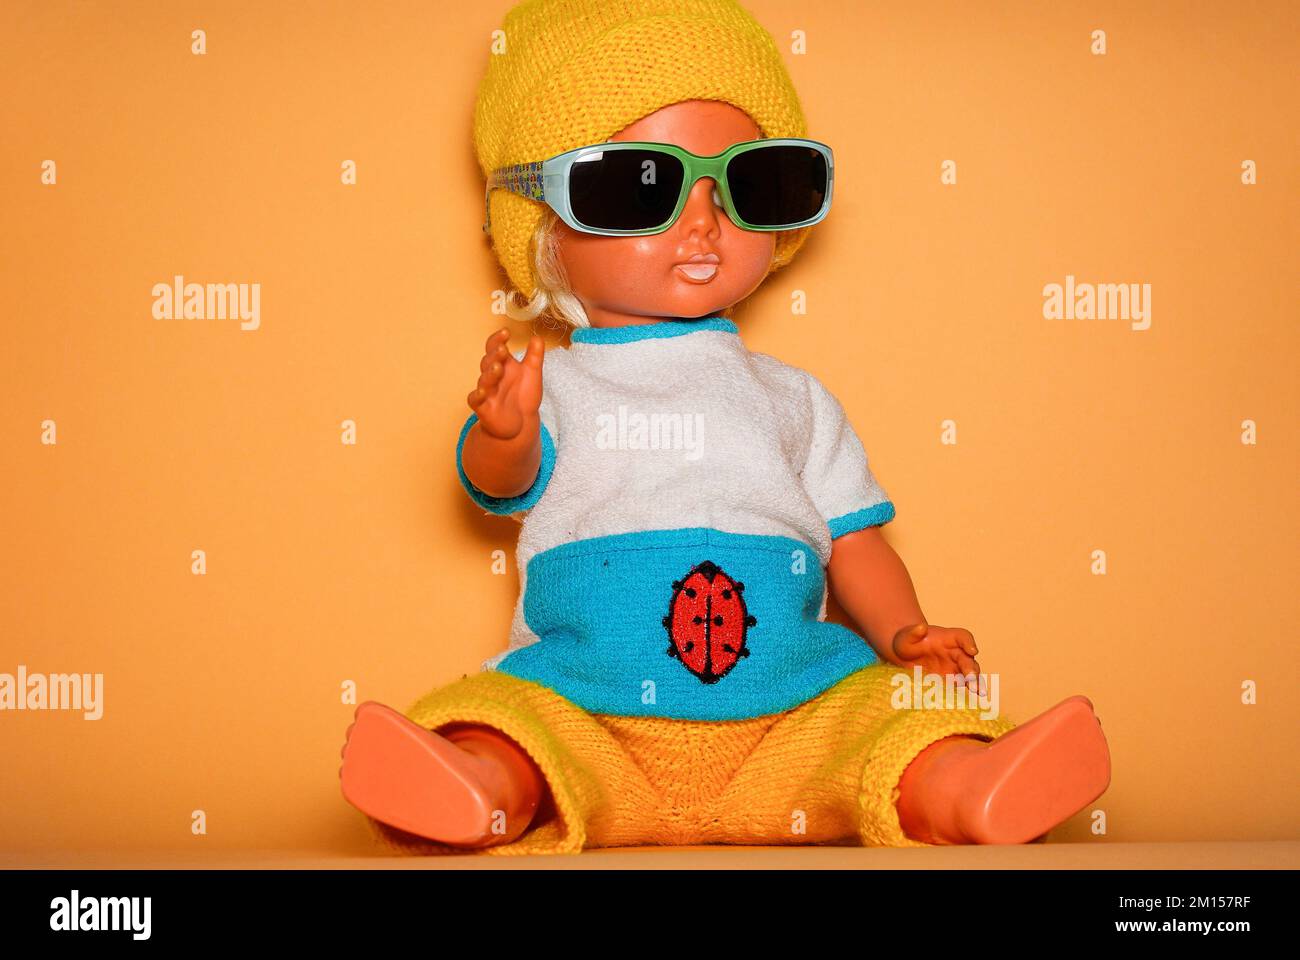 Smart doll with sunglasses and yellow knitted cap, children's toy from the GDR of the 1970s, concept of childlike play and human expression. Stock Photo